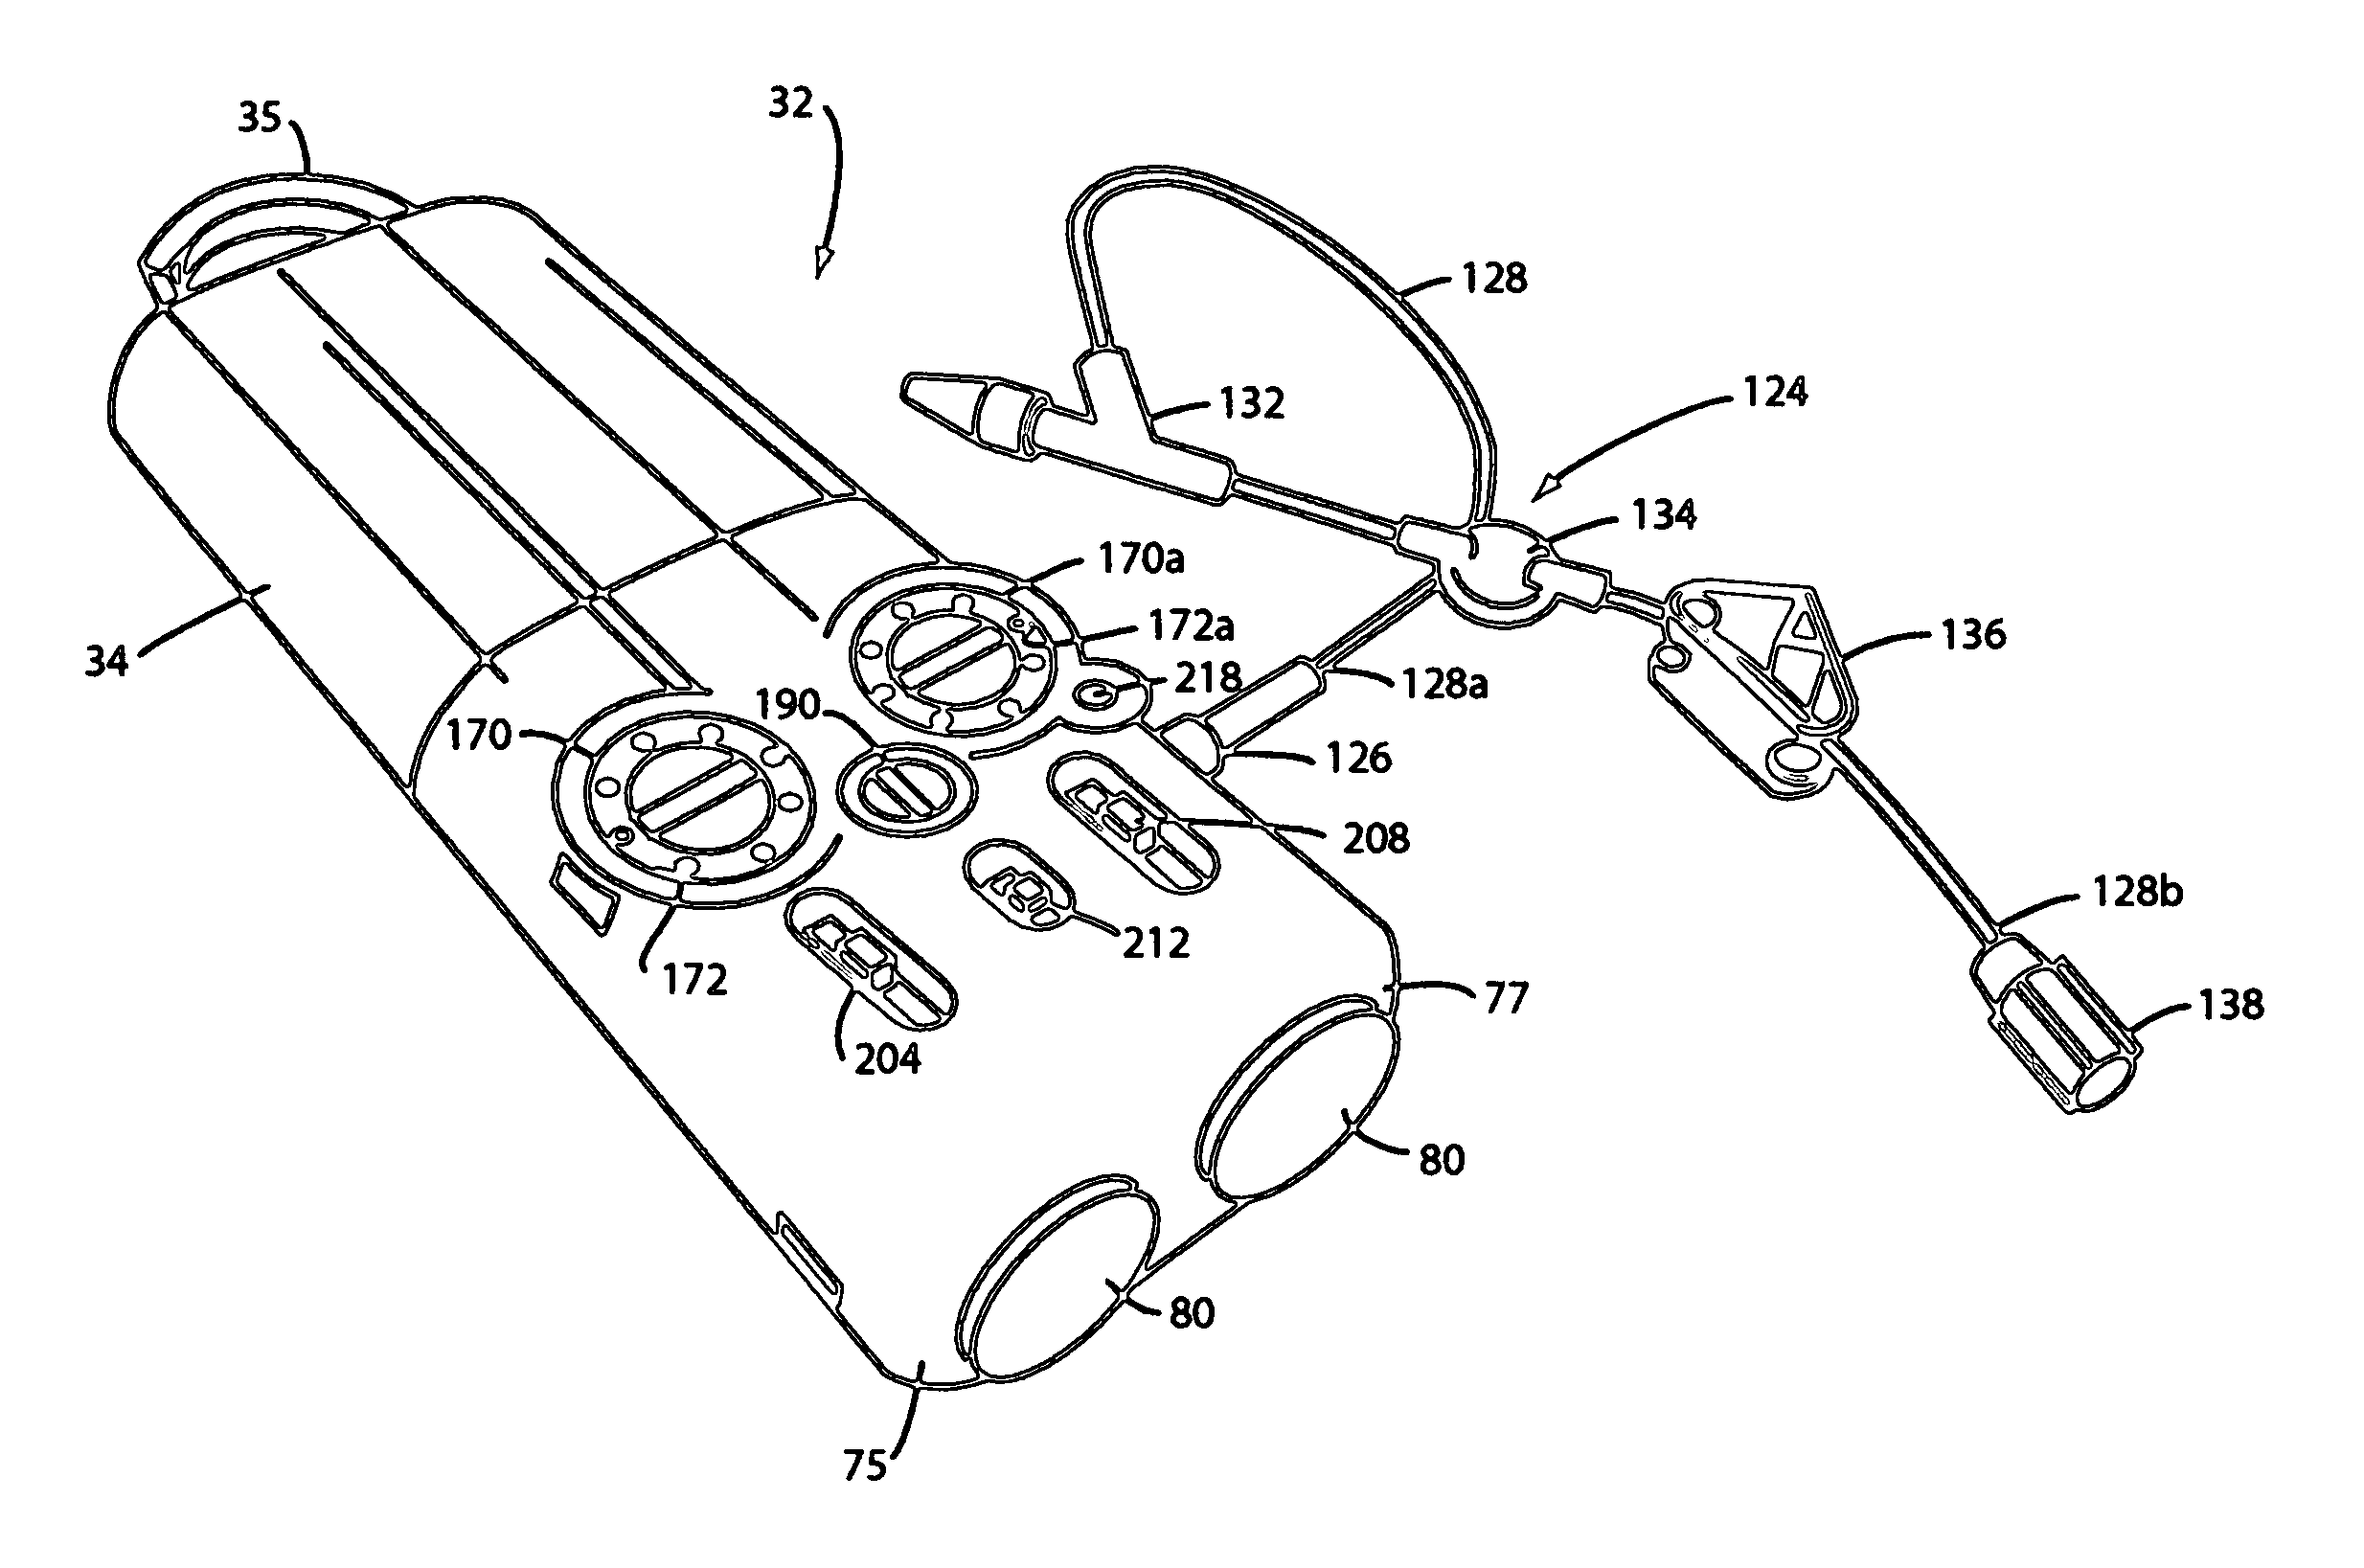 Fluid delivery and mixing apparatus with flow rate control